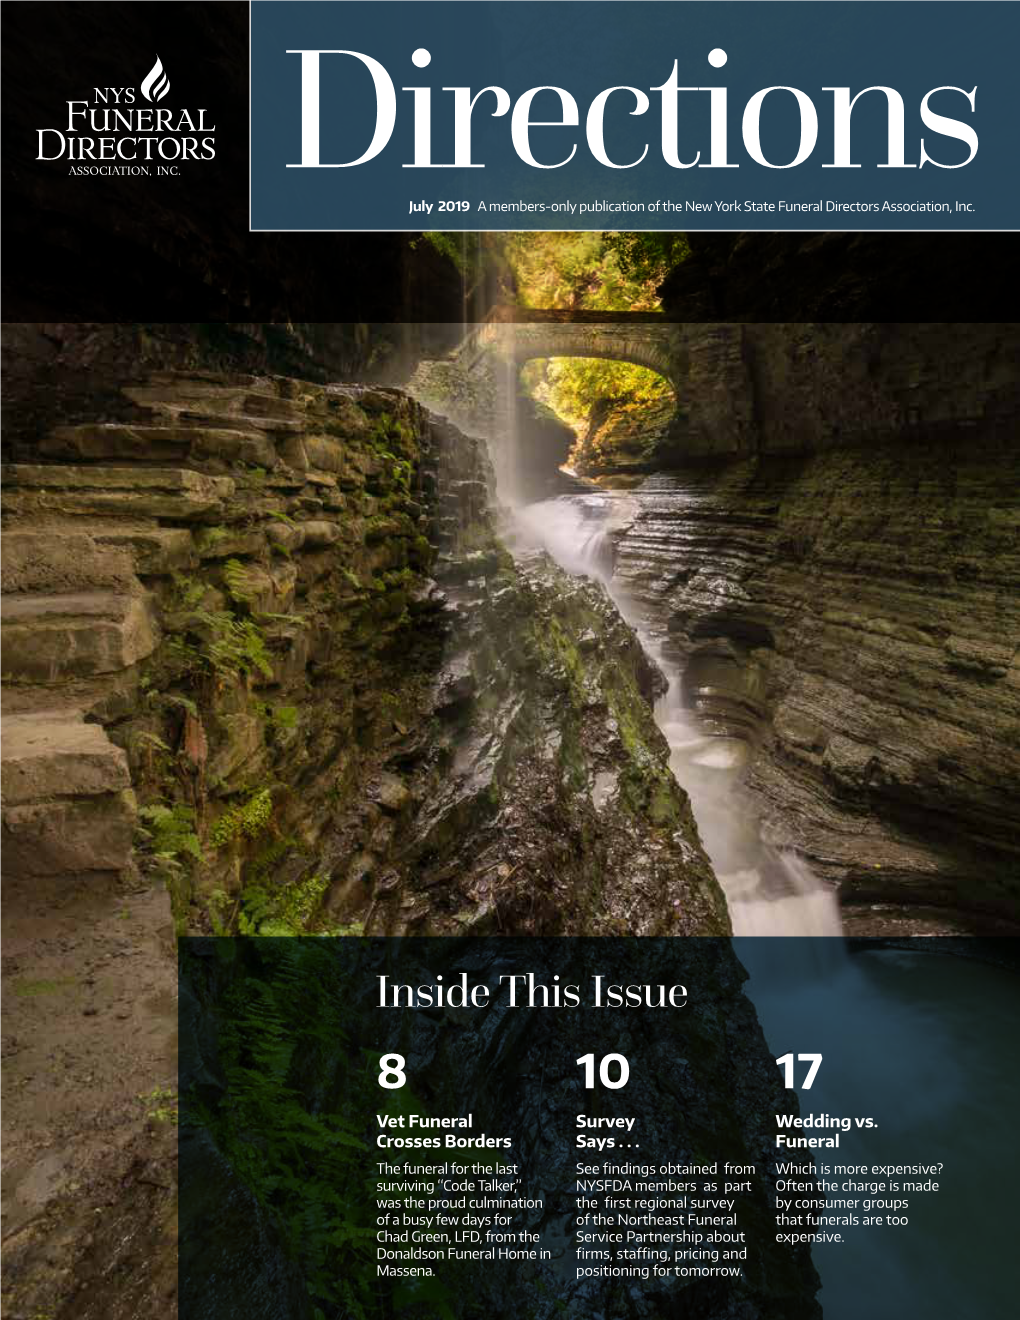 July 2019 a Members-Only Publication of the New York State Funeral Directors Association, Inc